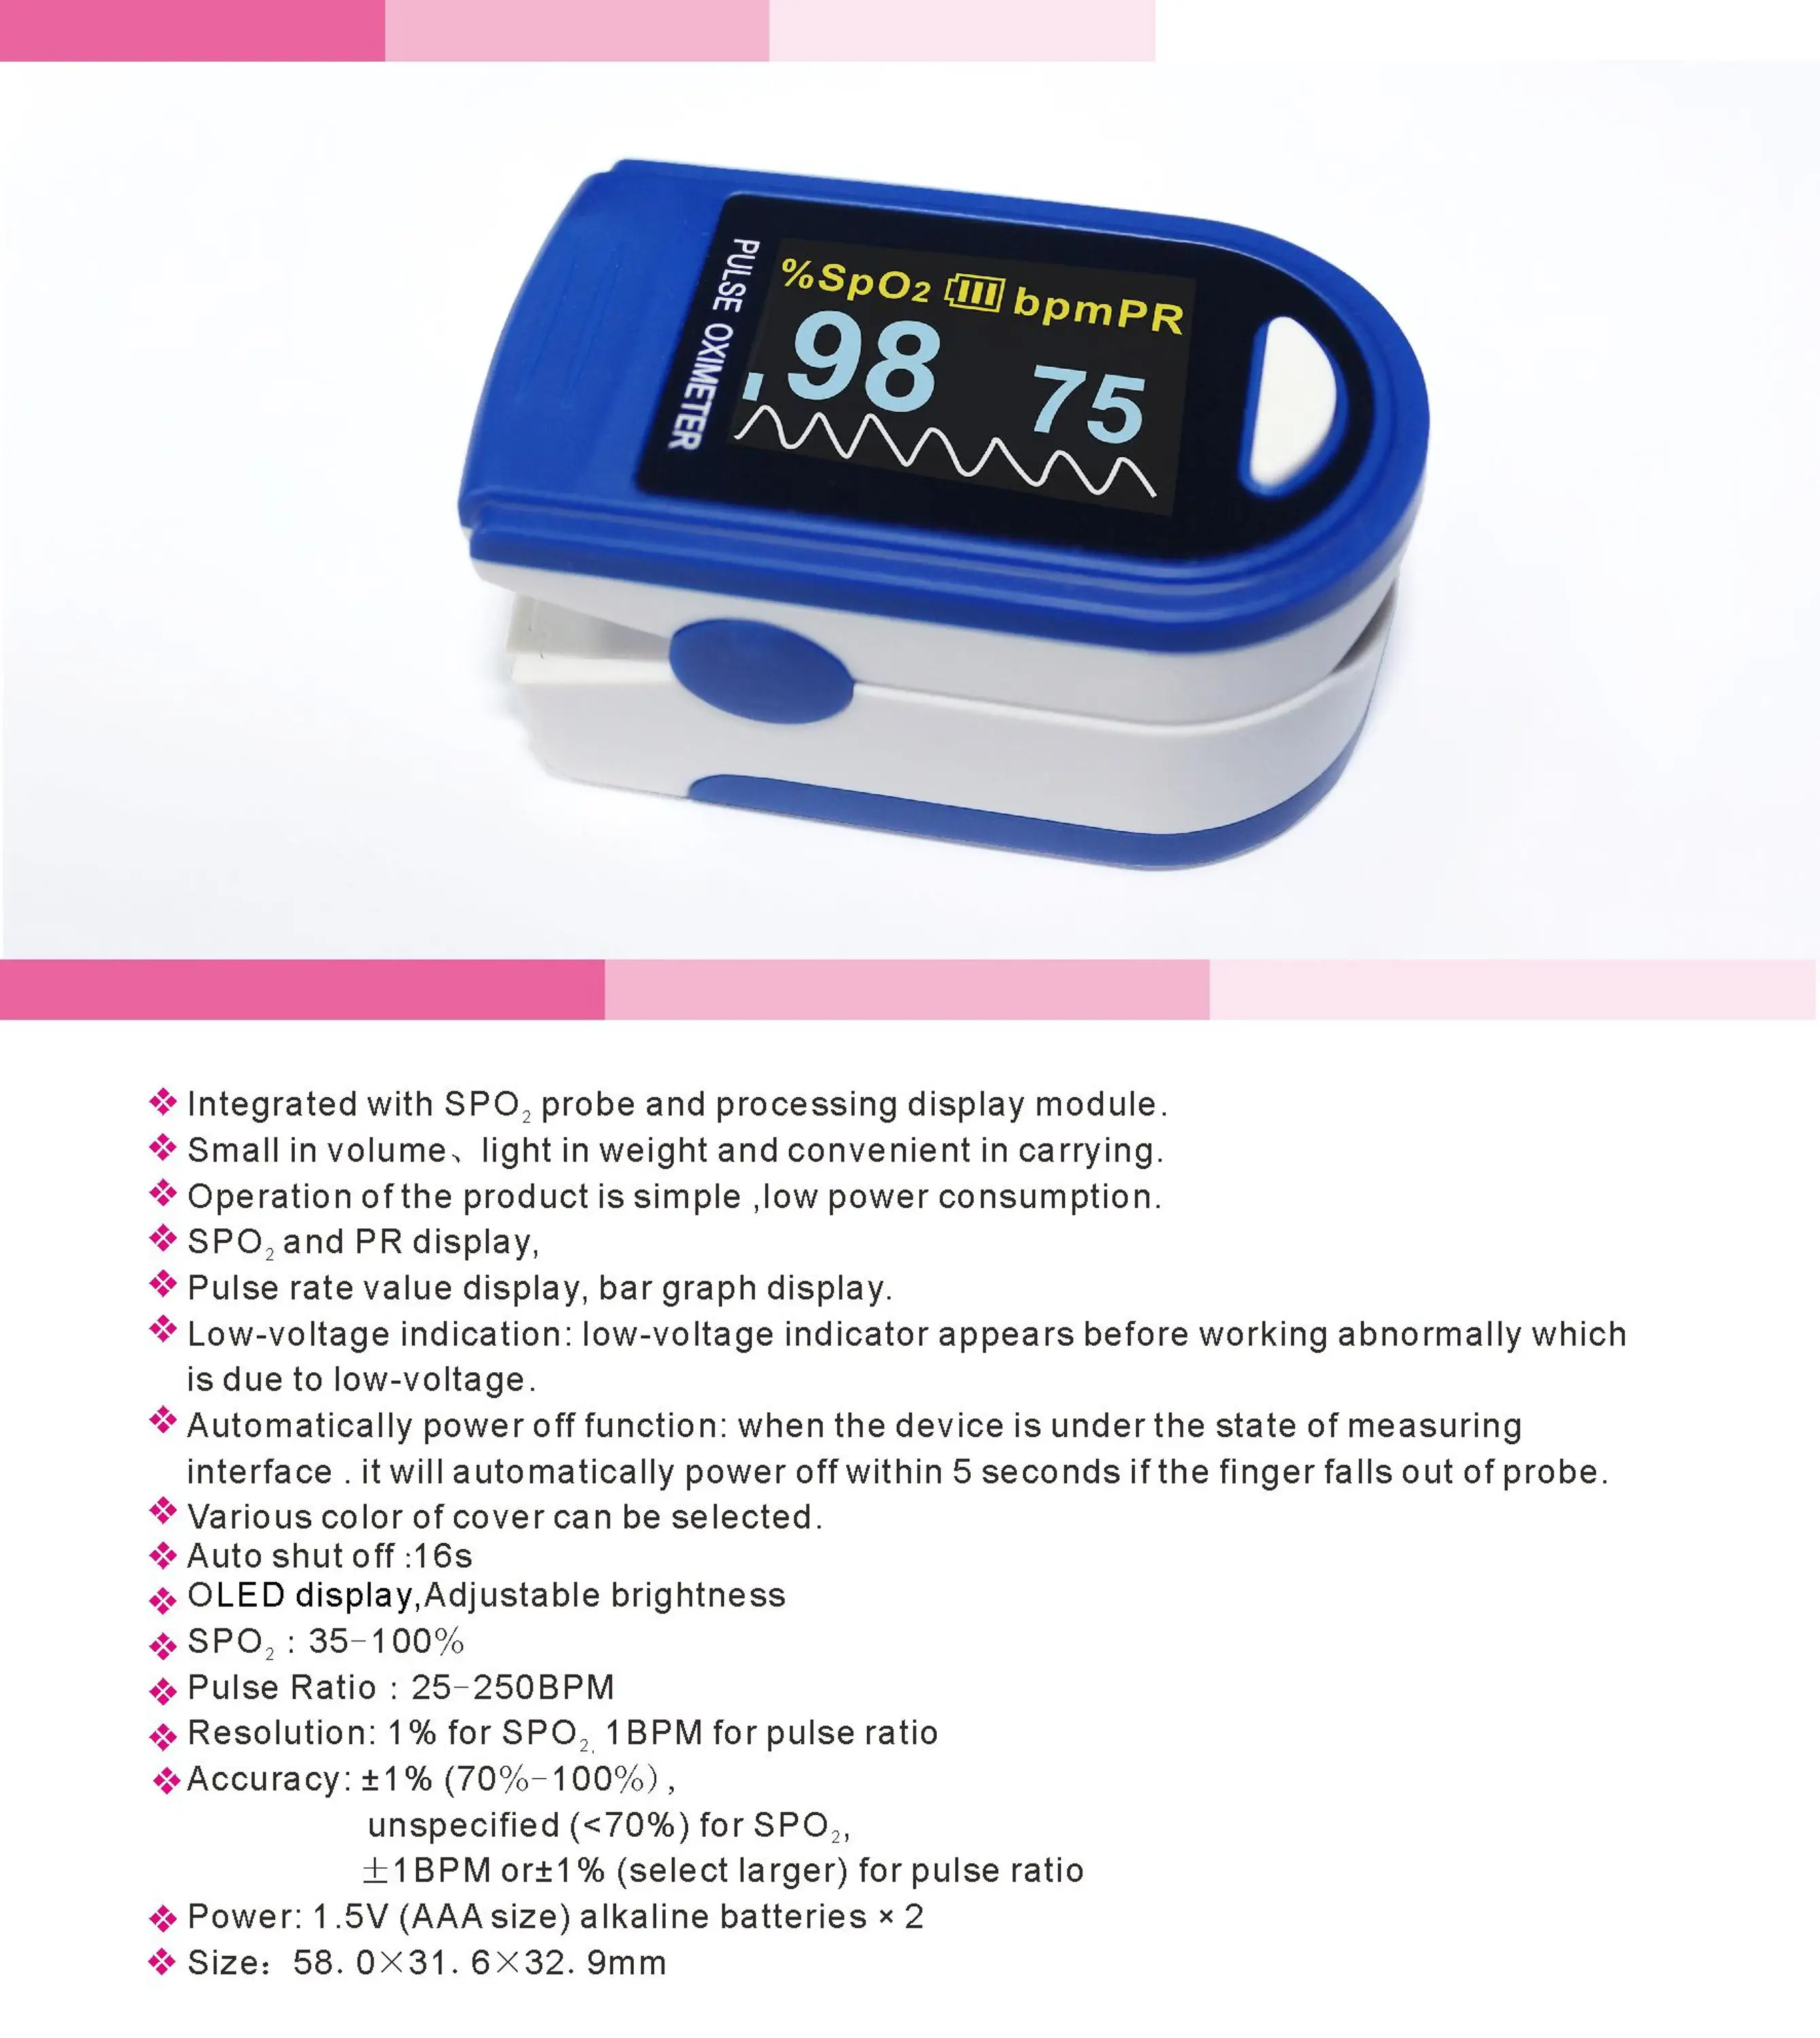 Jumper OLED portable pulse oximeter/ JPD-500C with CE and 510K